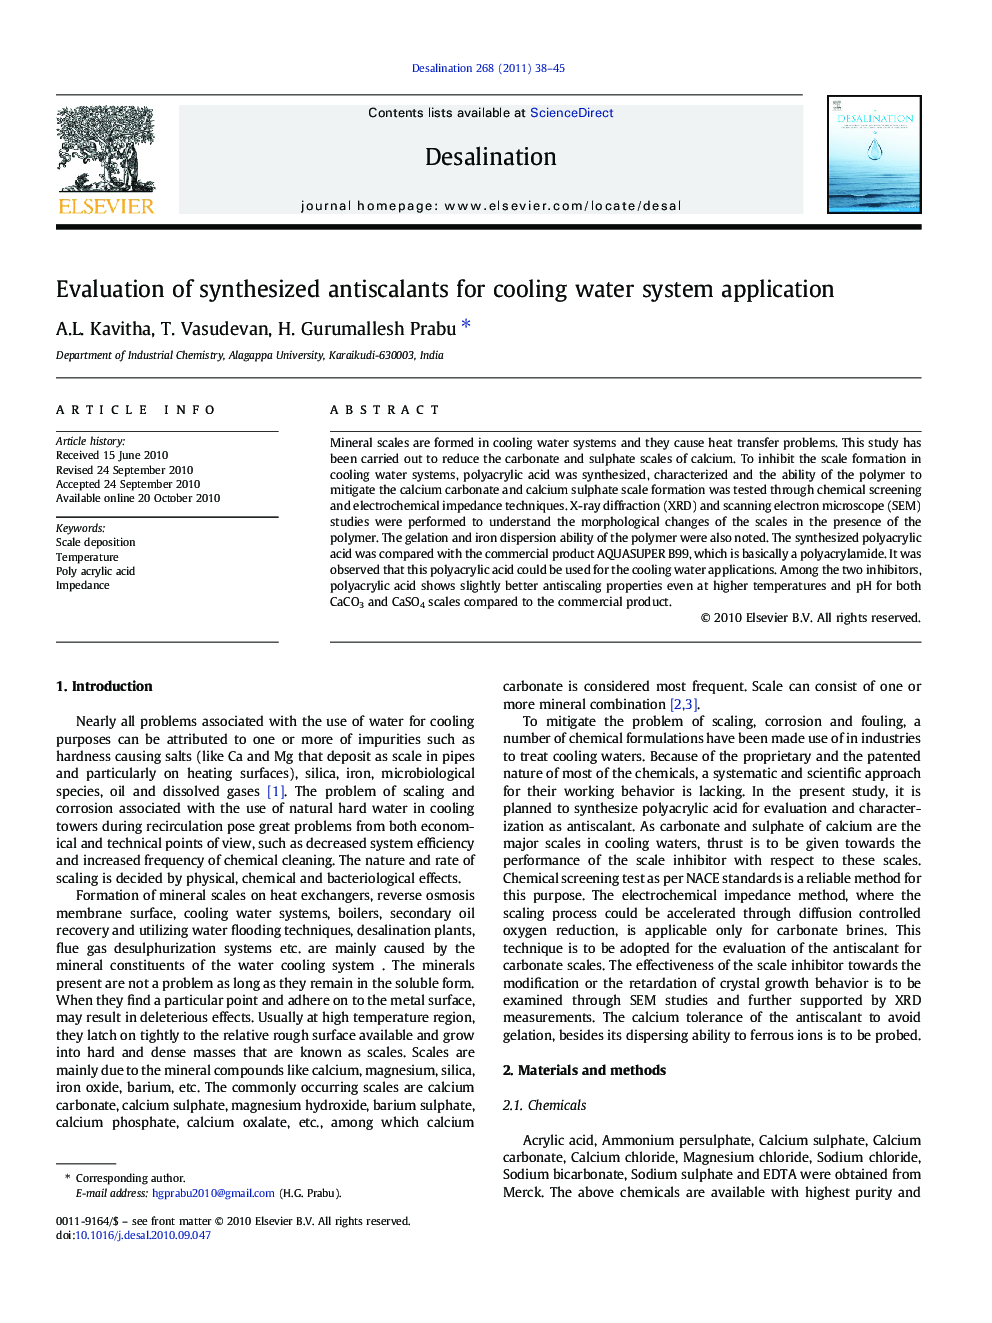 Evaluation of synthesized antiscalants for cooling water system application